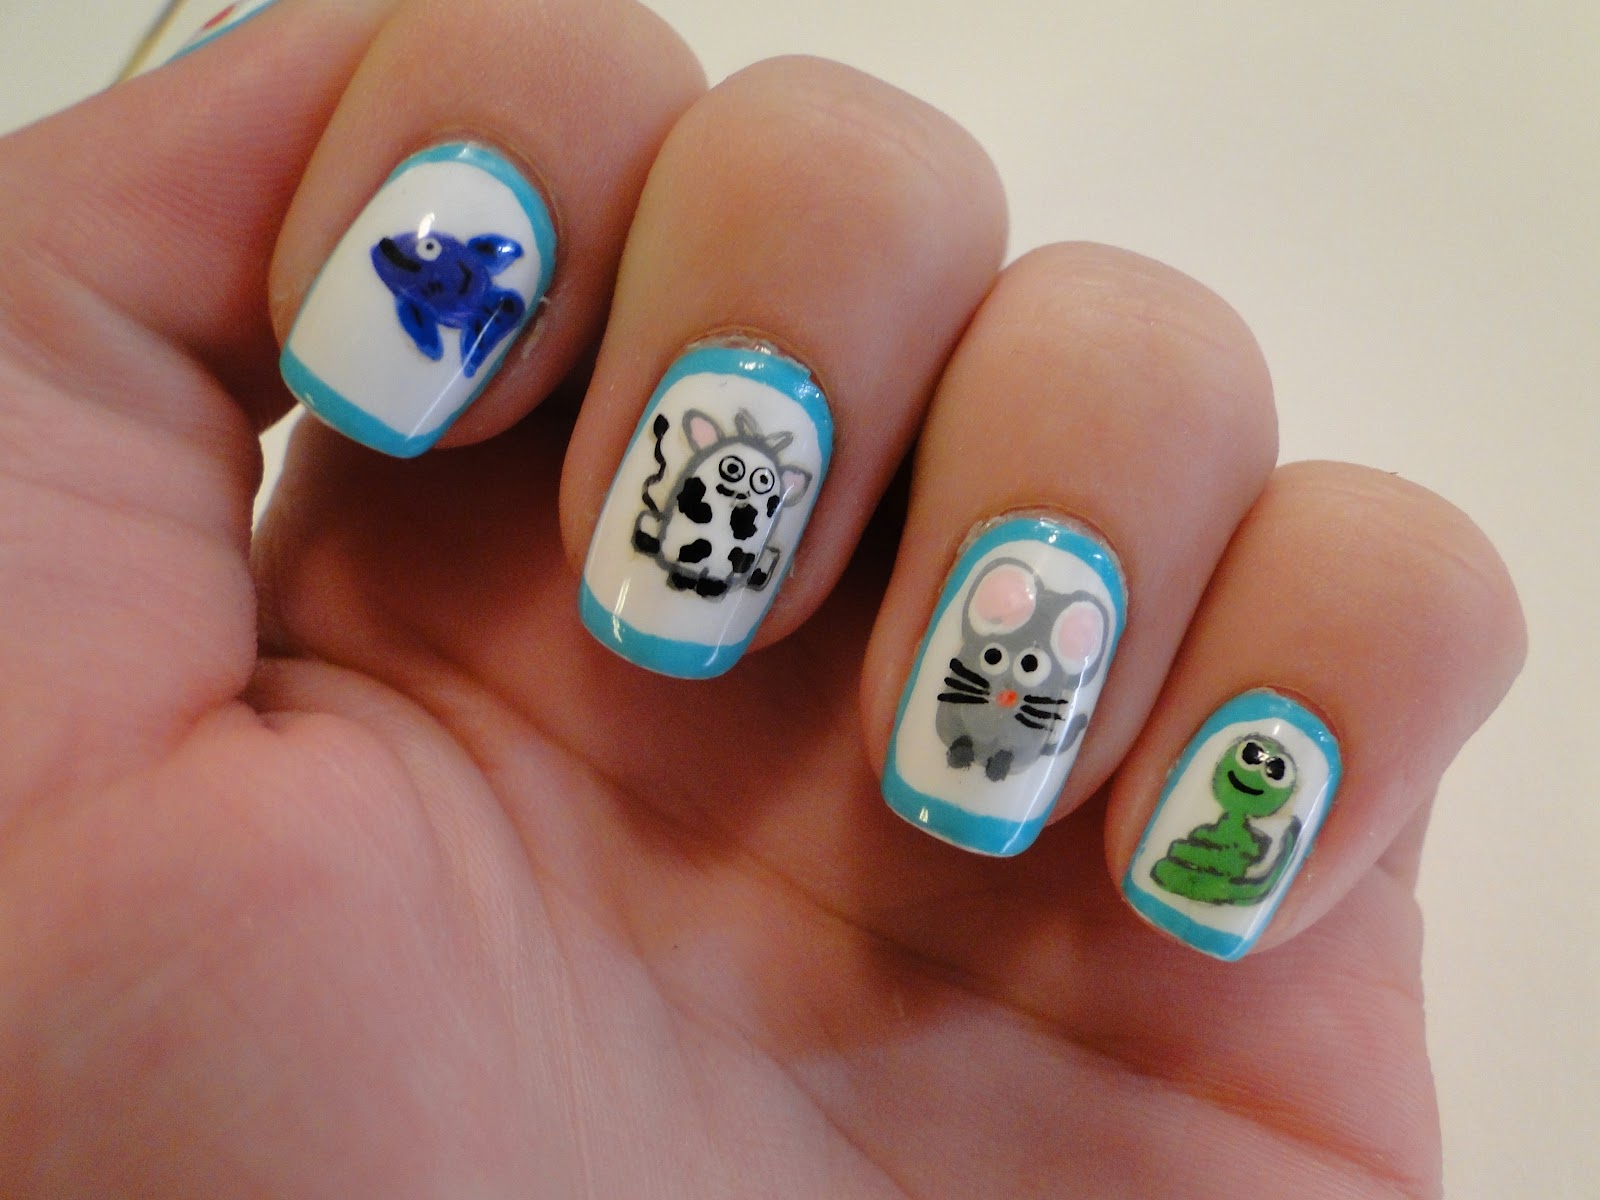 9. Adorable Animal Nail Art for Baby's Nursery - wide 4